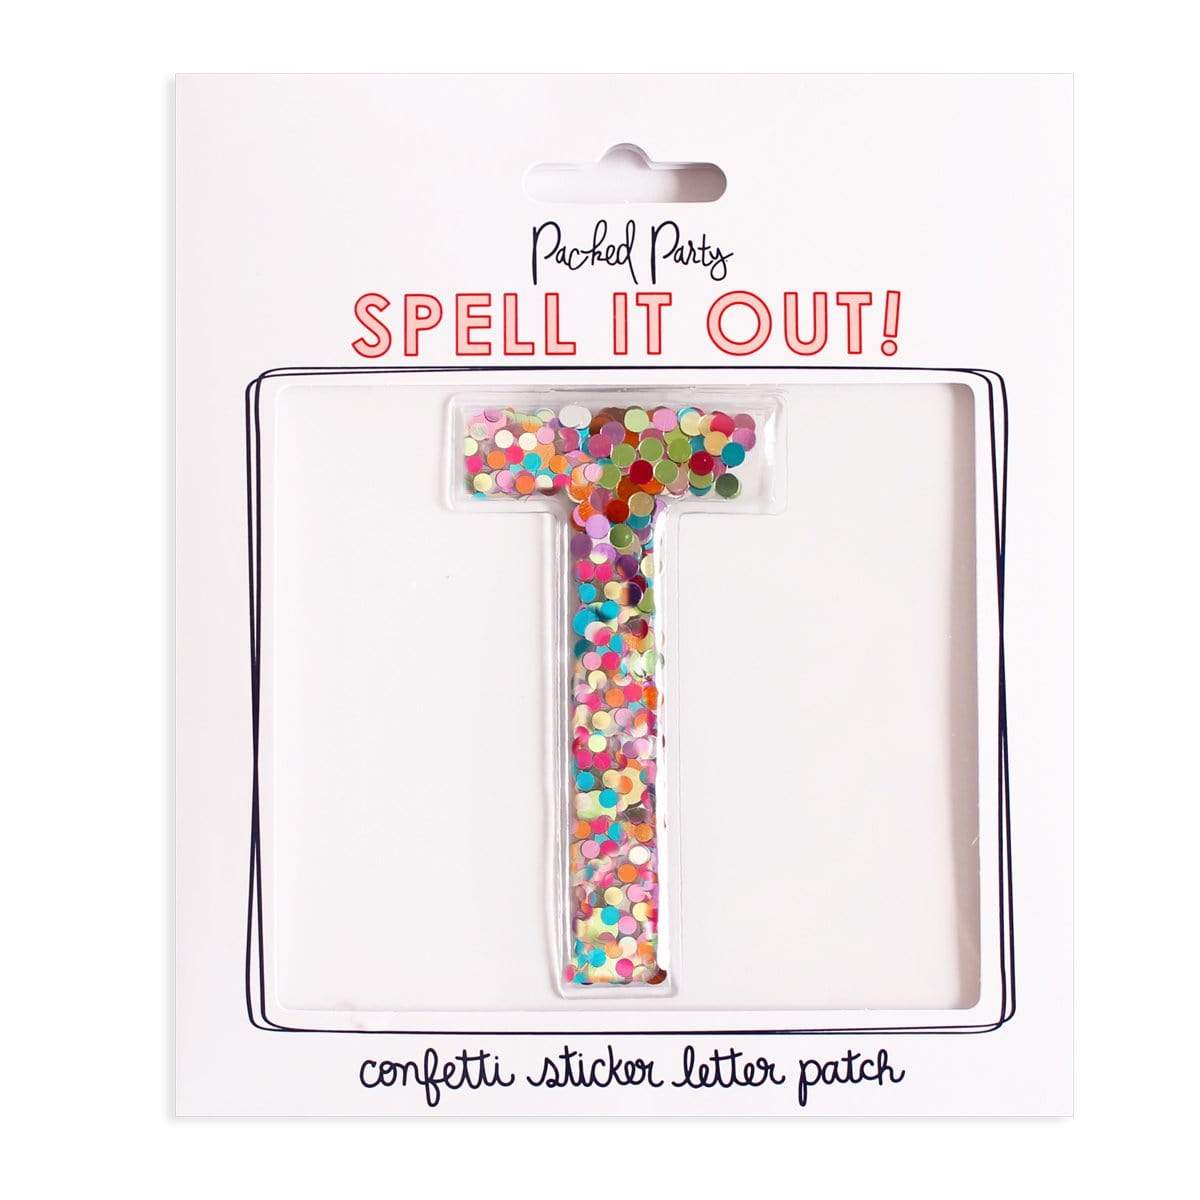 Packed Party Confetti Sticker Letters